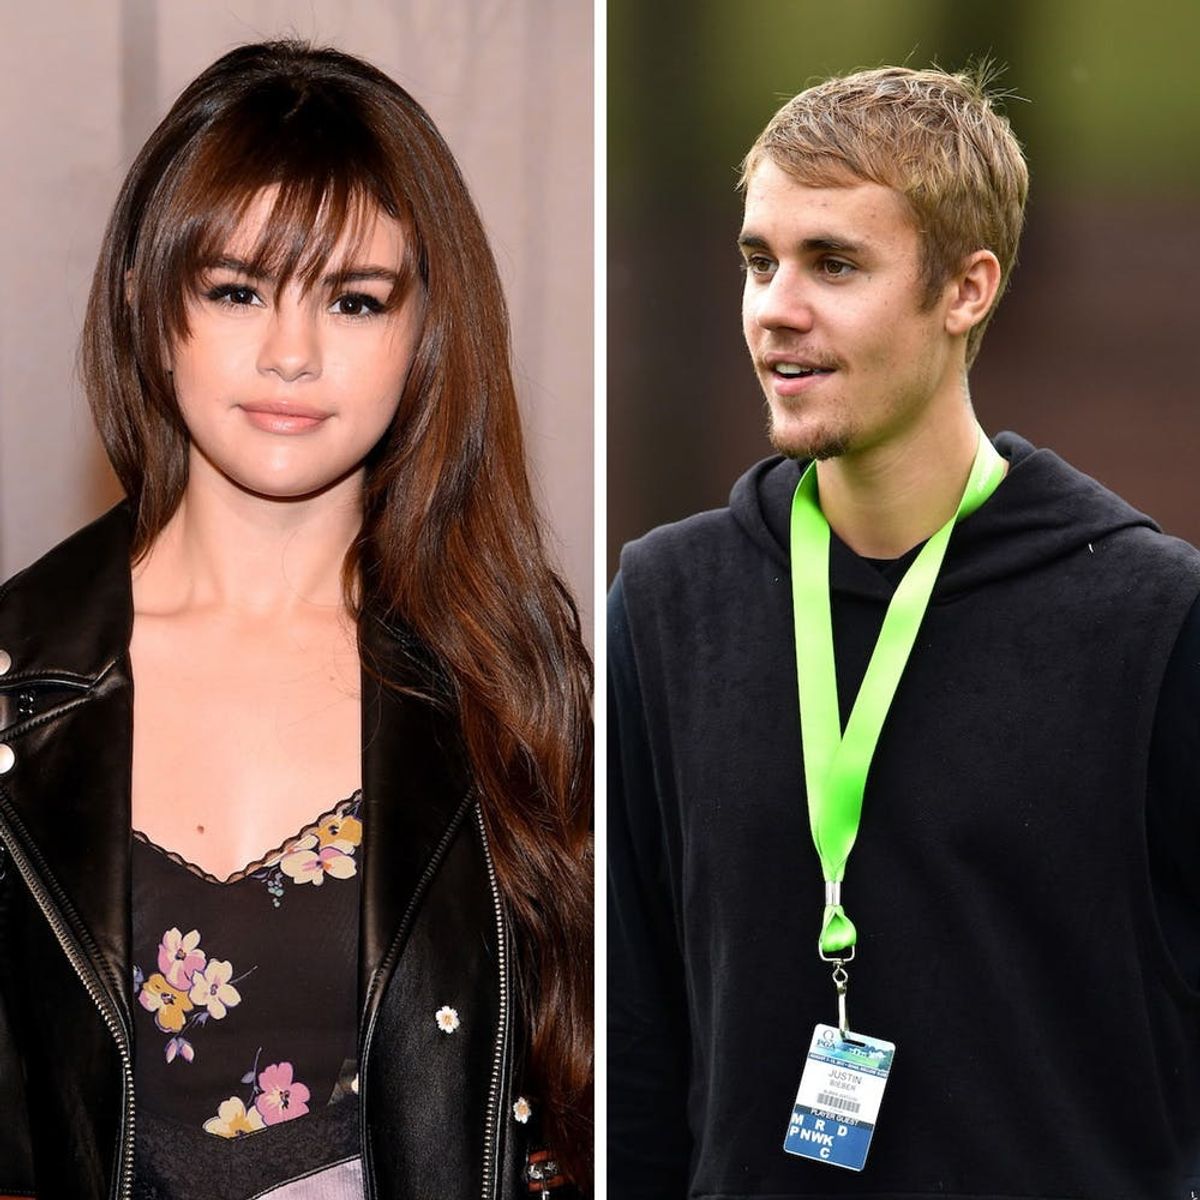 Selena Gomez’s Birthday Message to Justin Bieber Is Making Fans Seriously Emotional